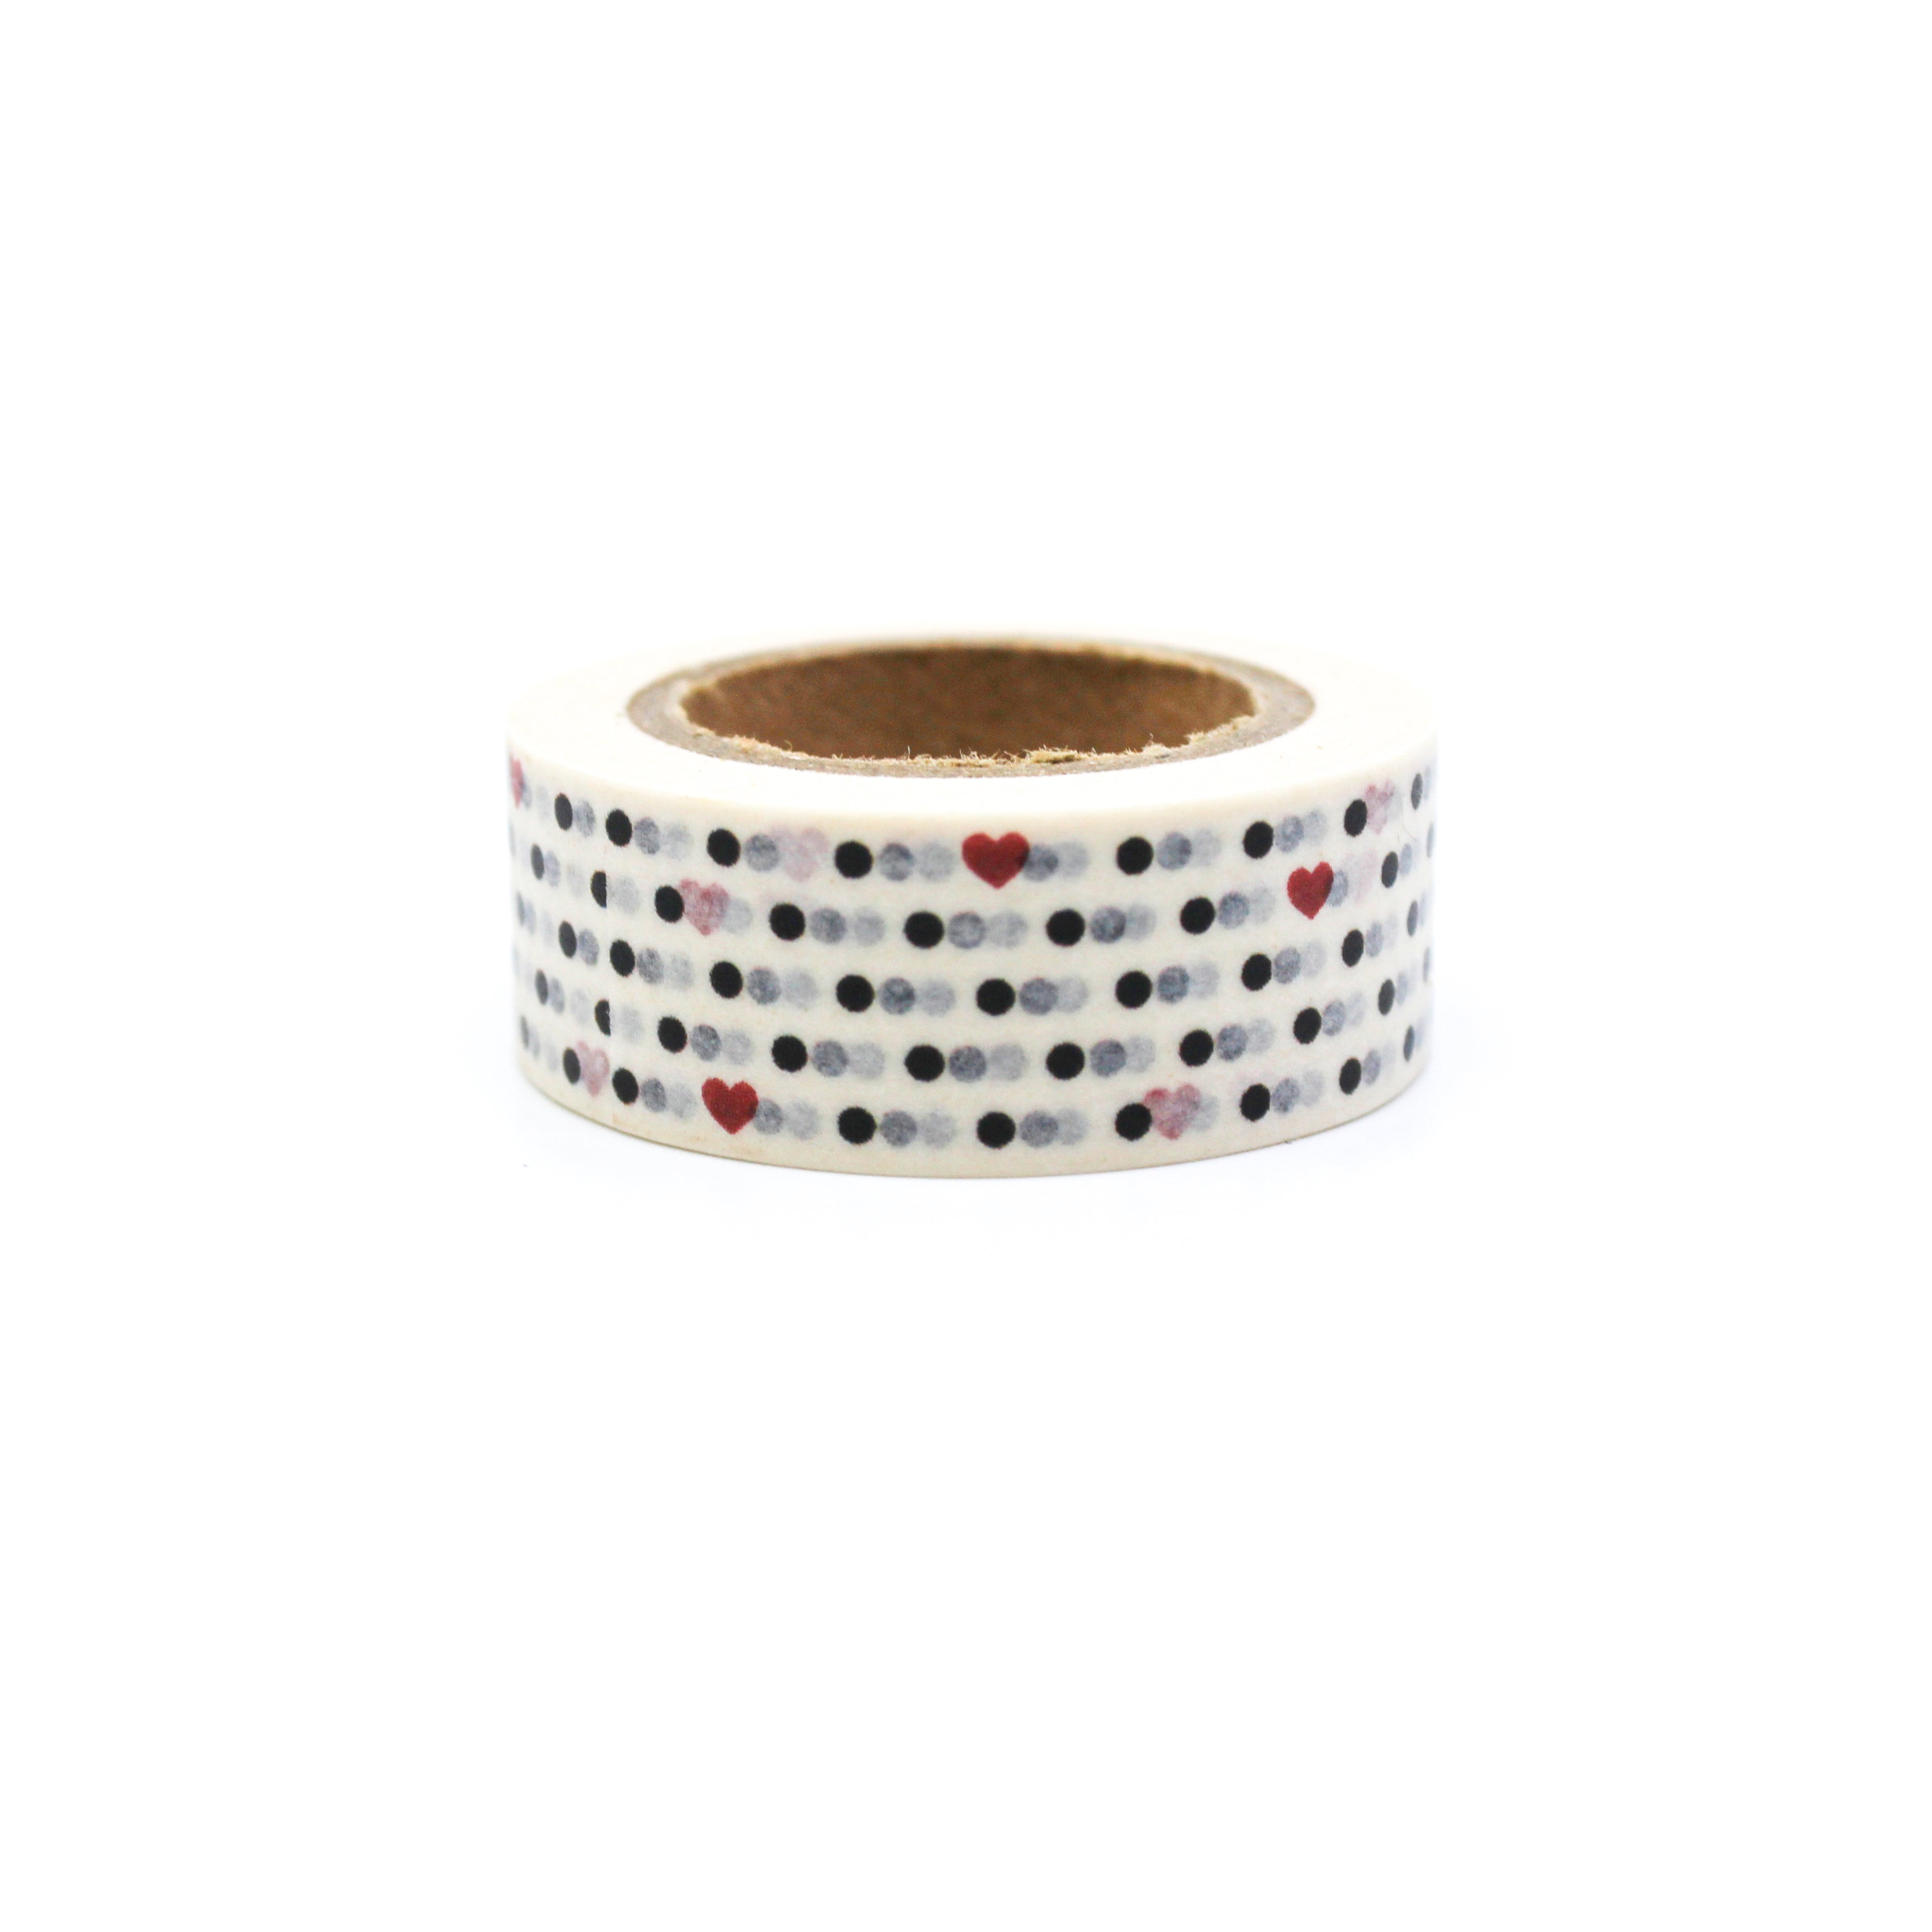 This is black dots with red hearts in a  white background washi tape from BBB Supplies Craft Shop